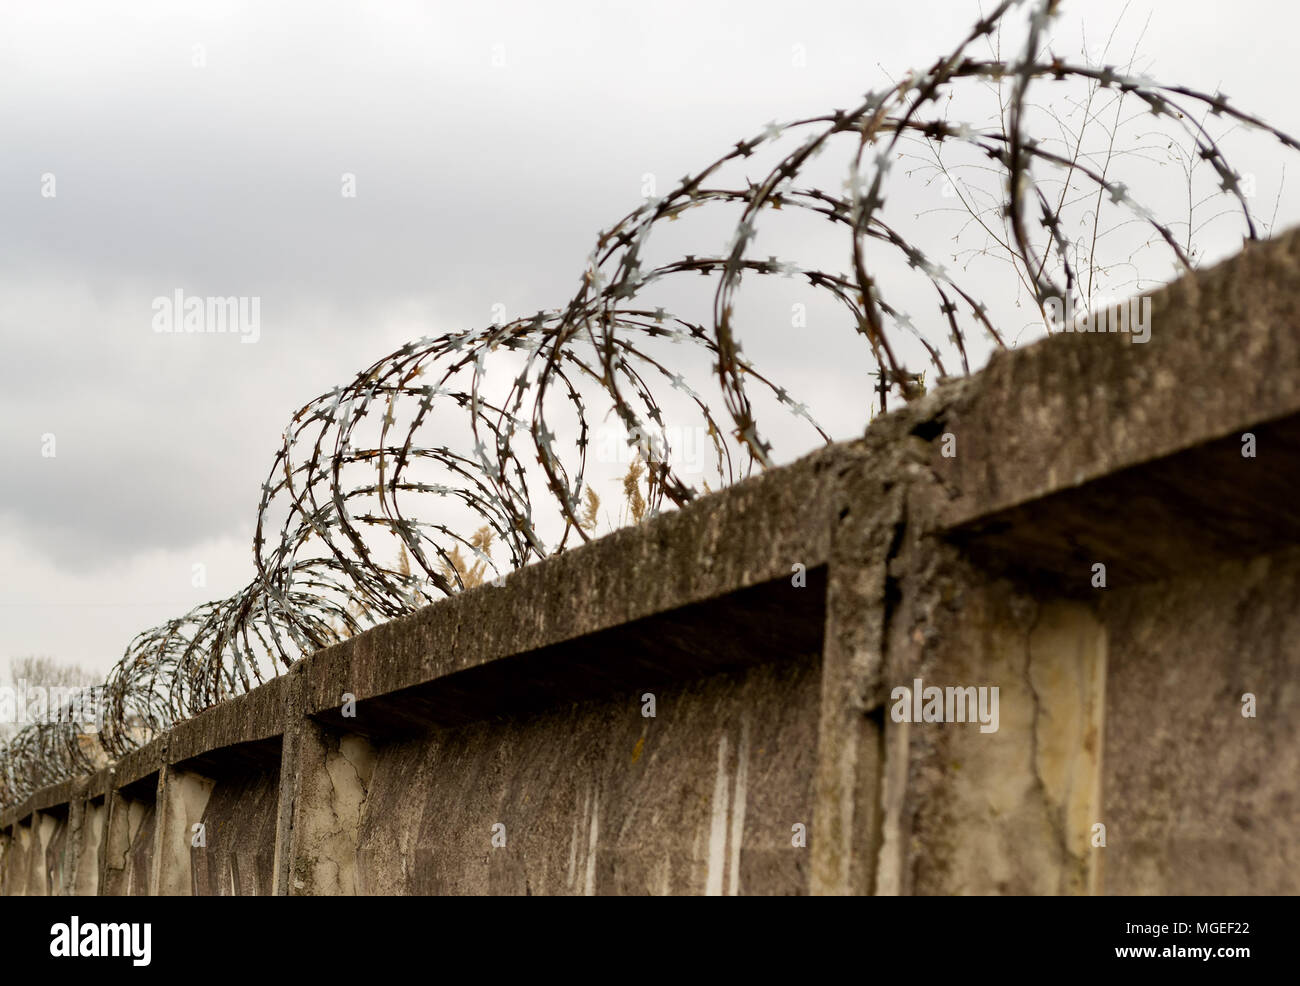 barbed wire fence and stone wall at the cloud sky Stock Photo